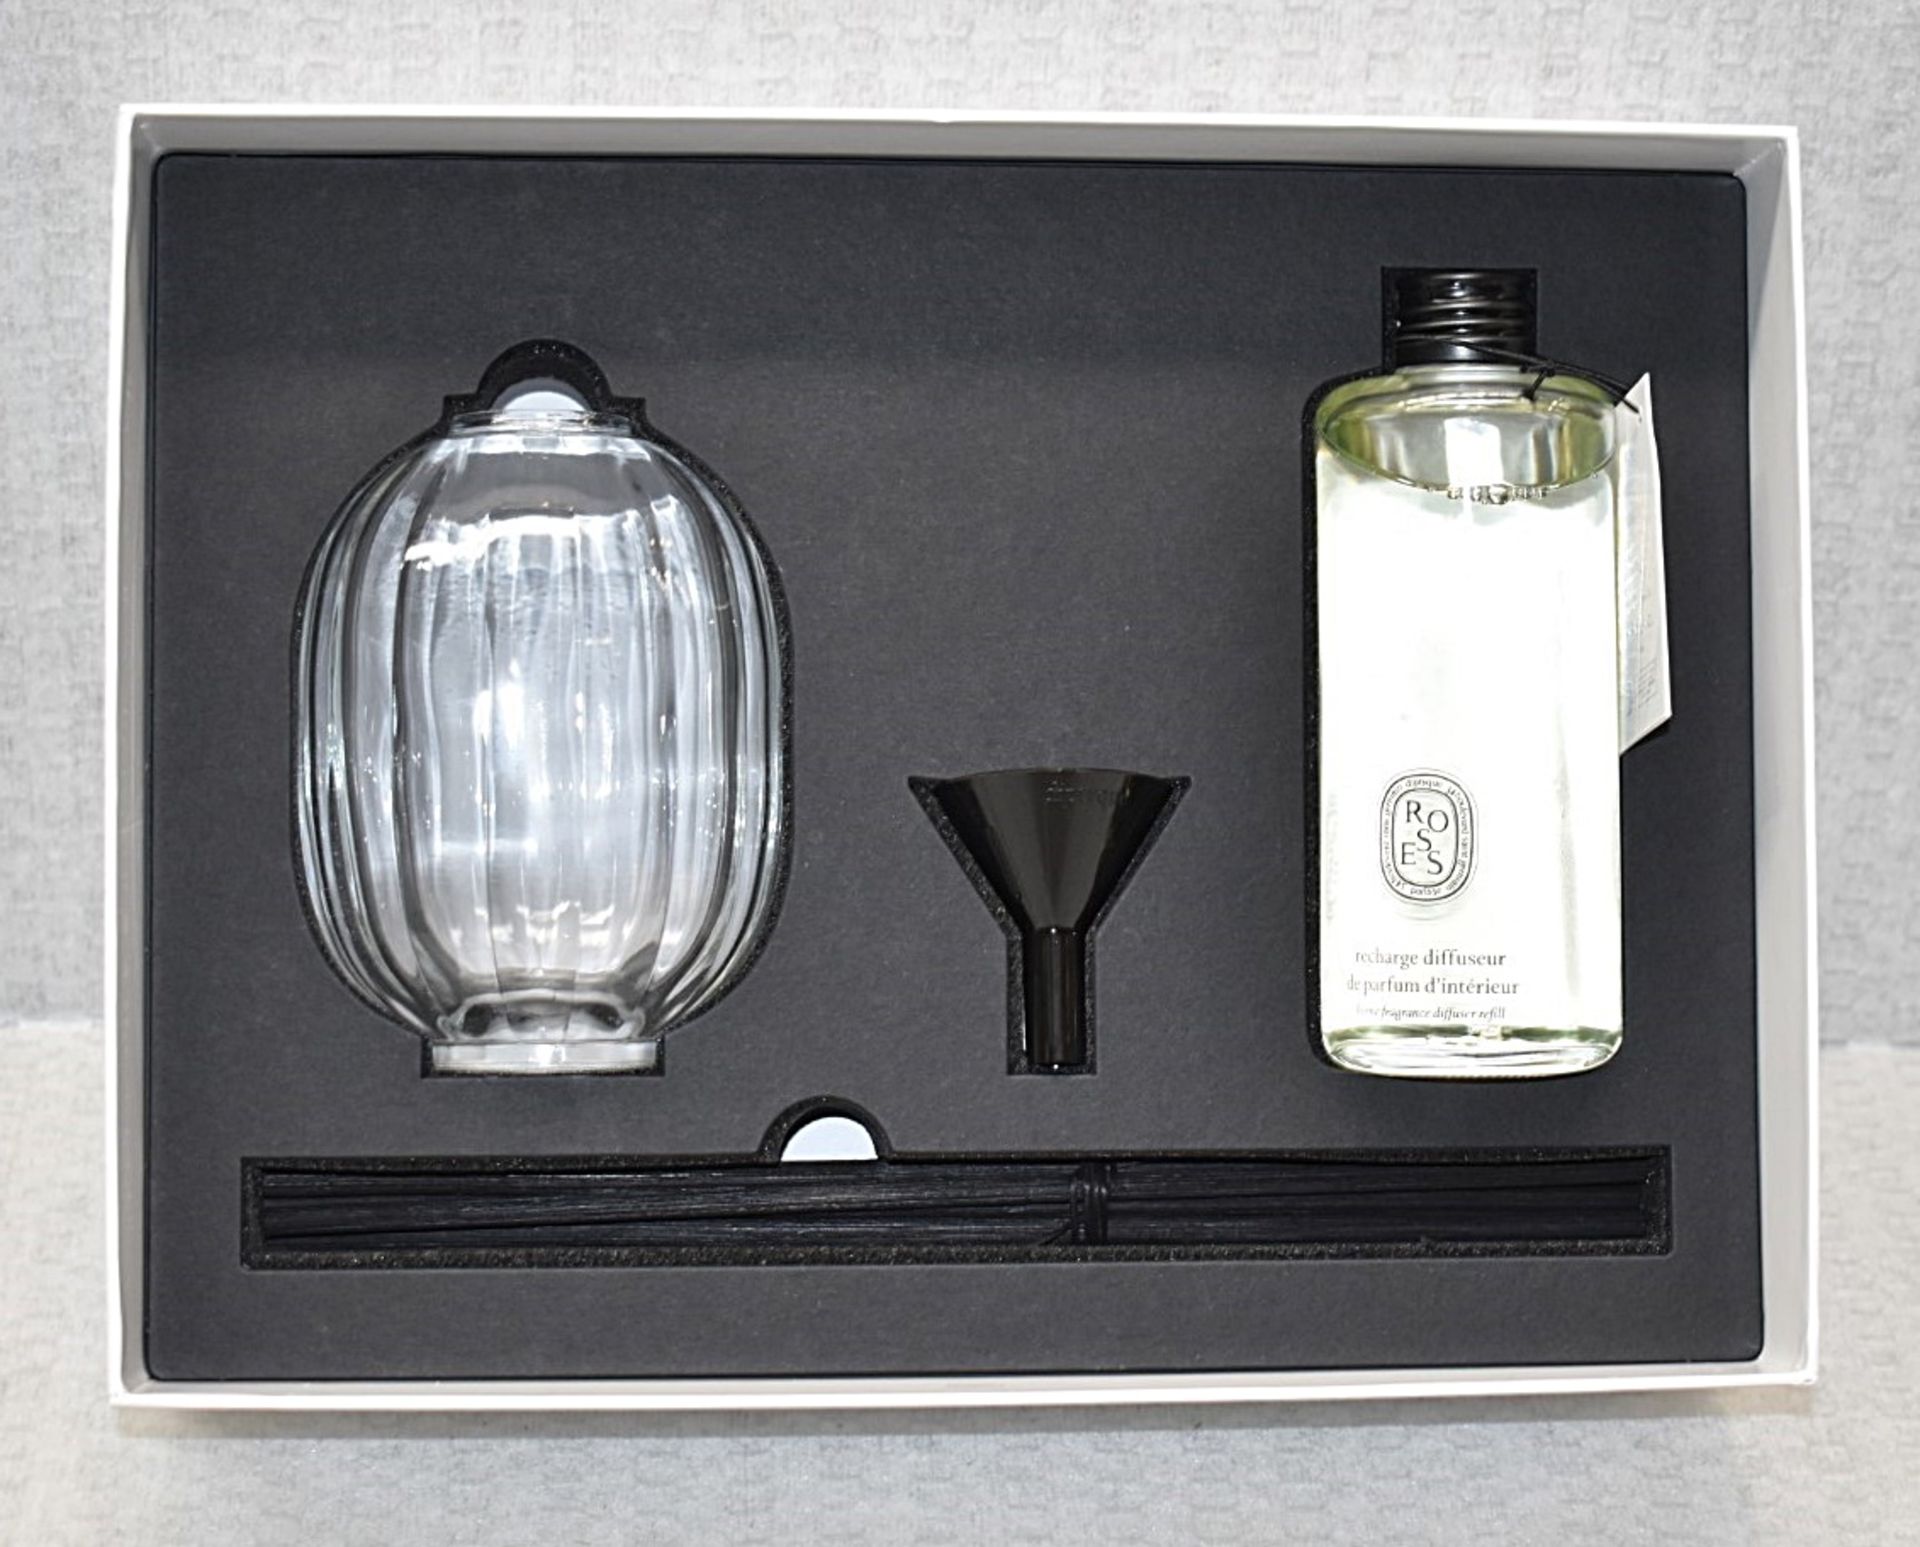 1 x DIPTYQUE 'Roses' Luxury Diffuser with Frangrance and Reeds (200ml) - Original Price £152.00 - Image 4 of 6